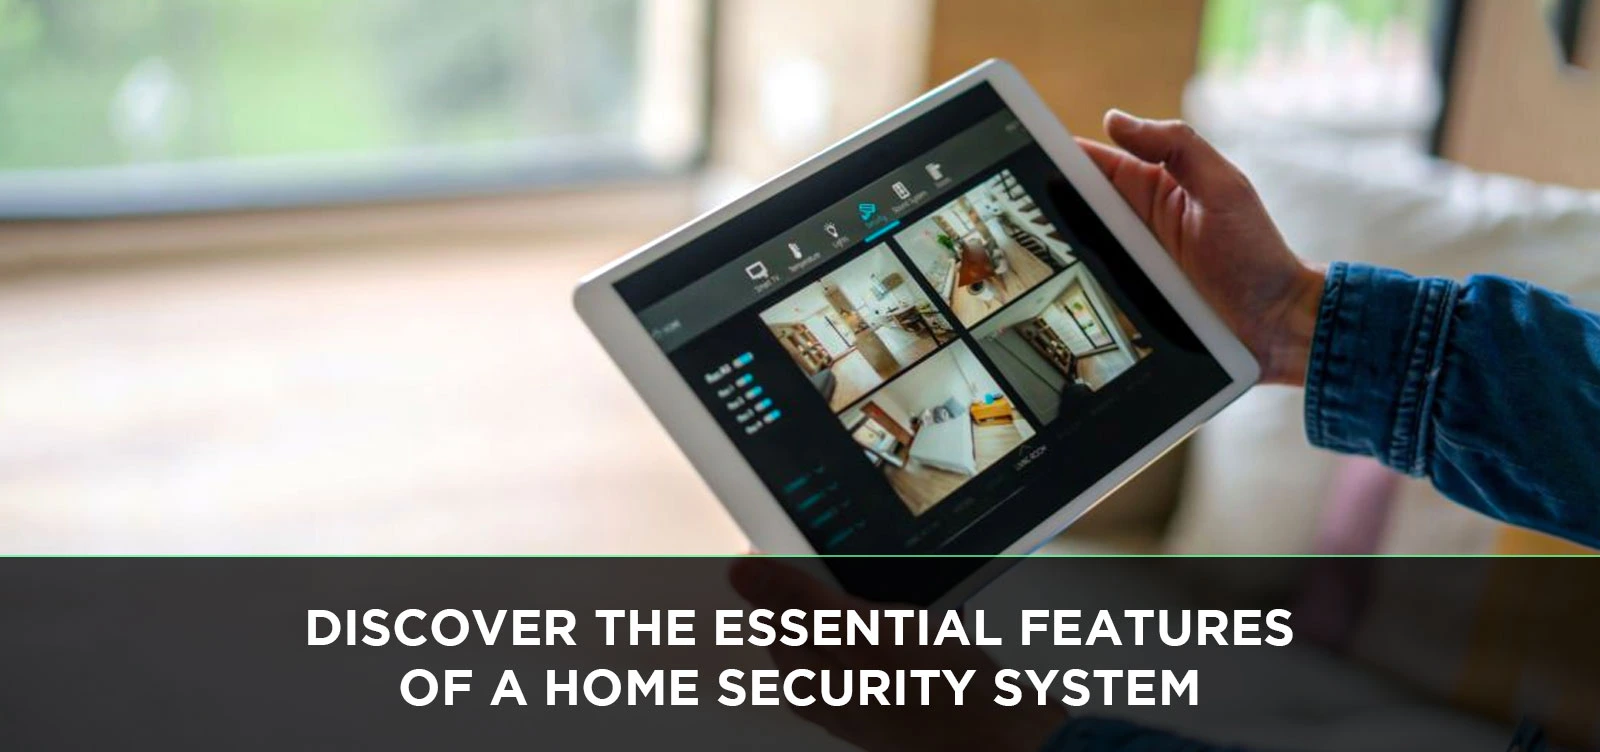 The Benefits of Home Surveillance Systems